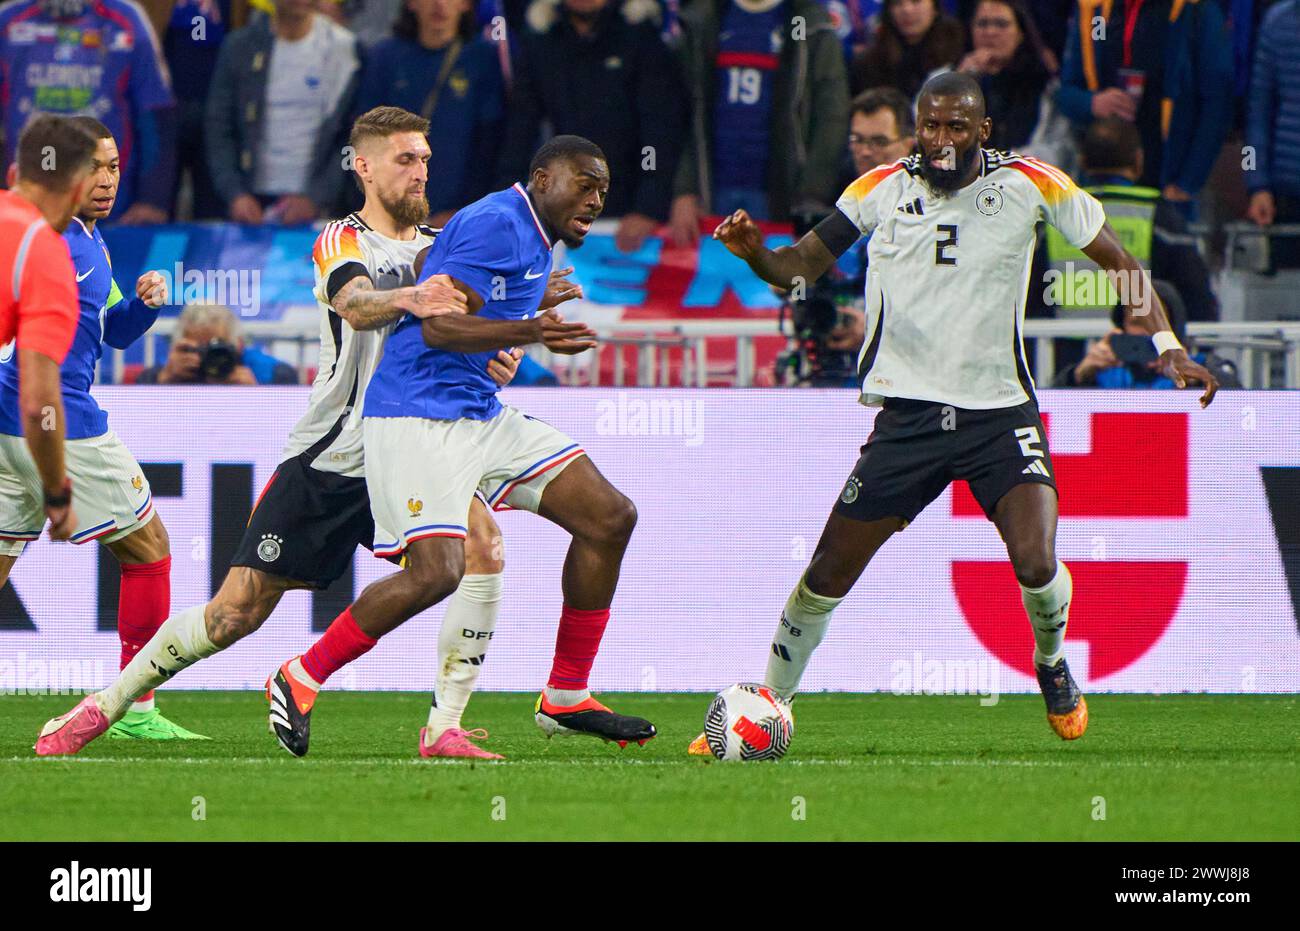 Robert Andrich, DFB 23  Antonio Rüdiger, Ruediger, DFB 2 compete for the ball, tackling, duel, header, zweikampf, action, fight against Youssouf Fofana, FRA 19  in the friendly match FRANCE - GERMANY  0-2  FRANKREICH - DEUTSCHLAND 0-2 in preparation for European Championships 2024  on Mar 23, 2024  in Lyon, France.  © Peter Schatz / Alamy Live News Stock Photo